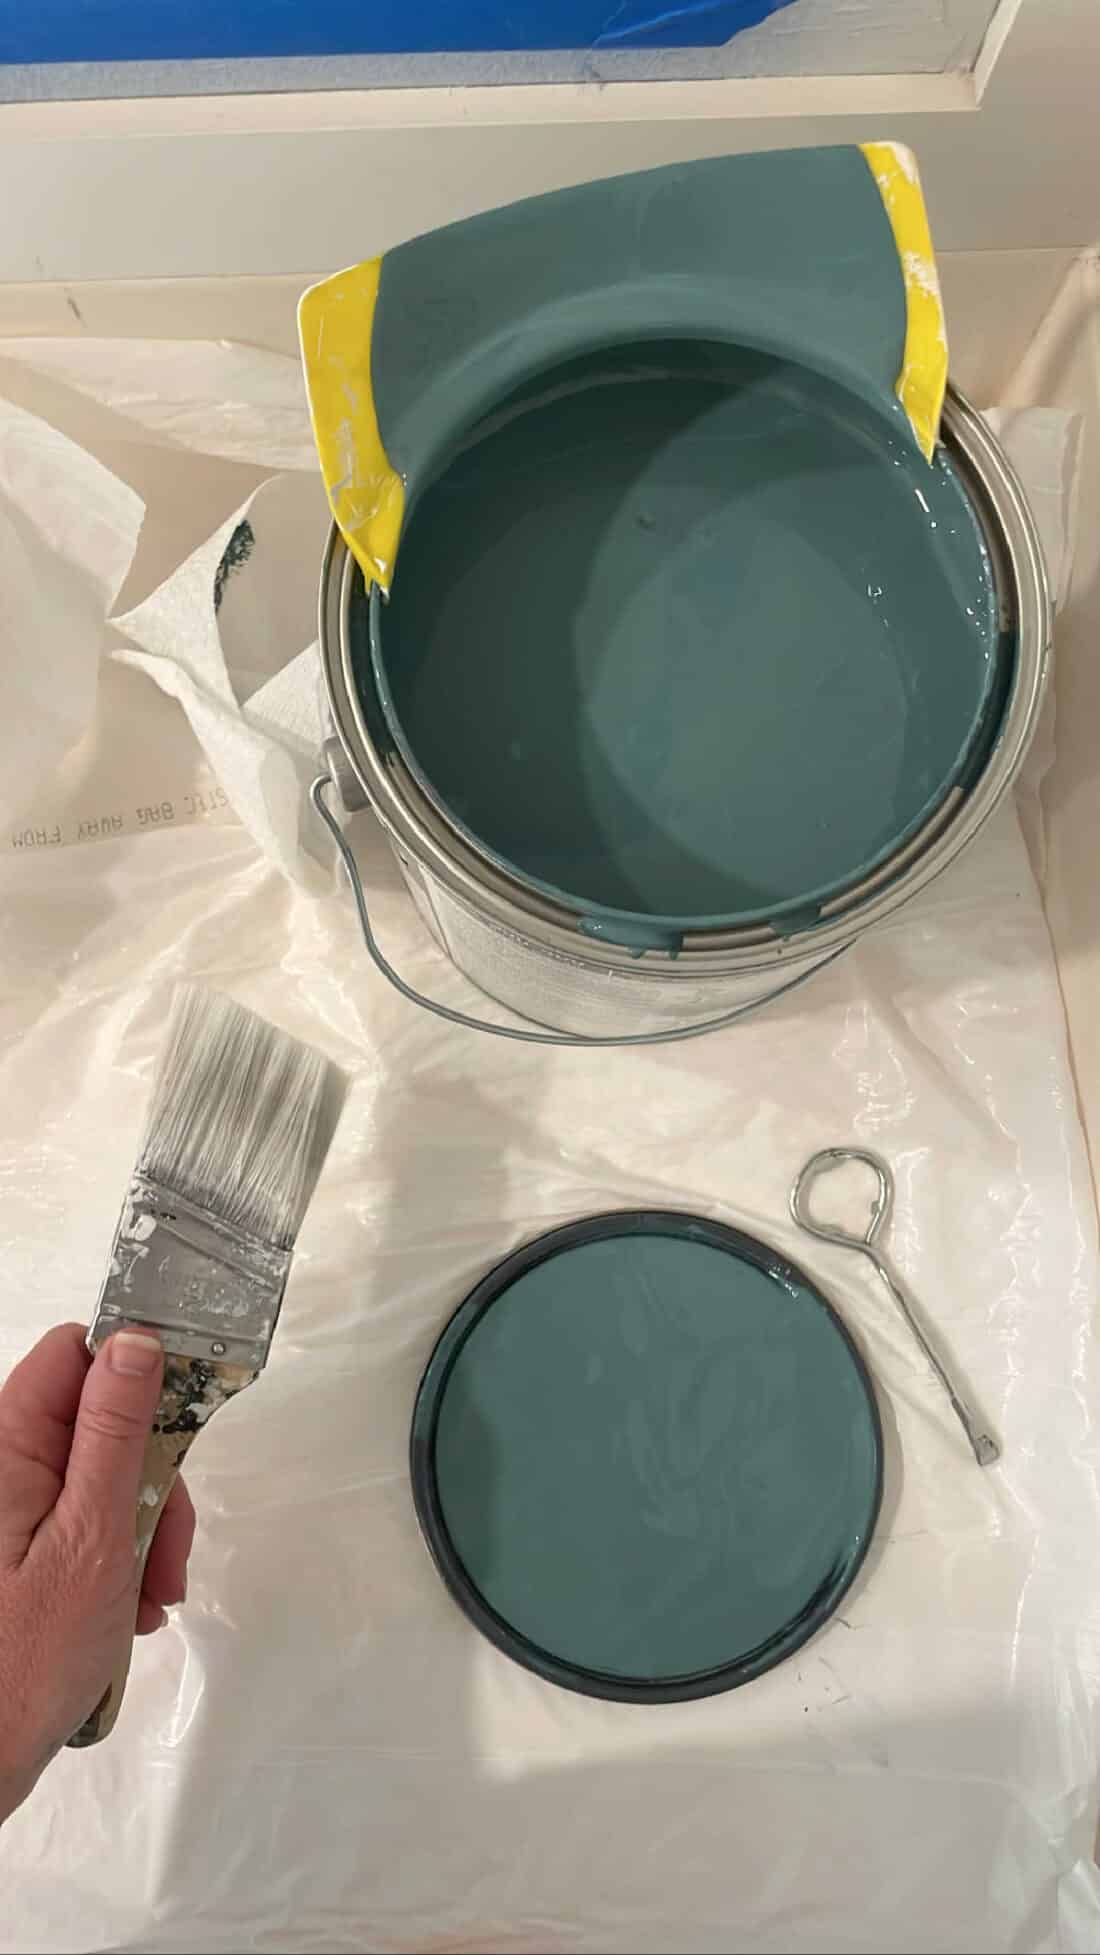 Sherwin Williams Mediterranean paint color in the can 